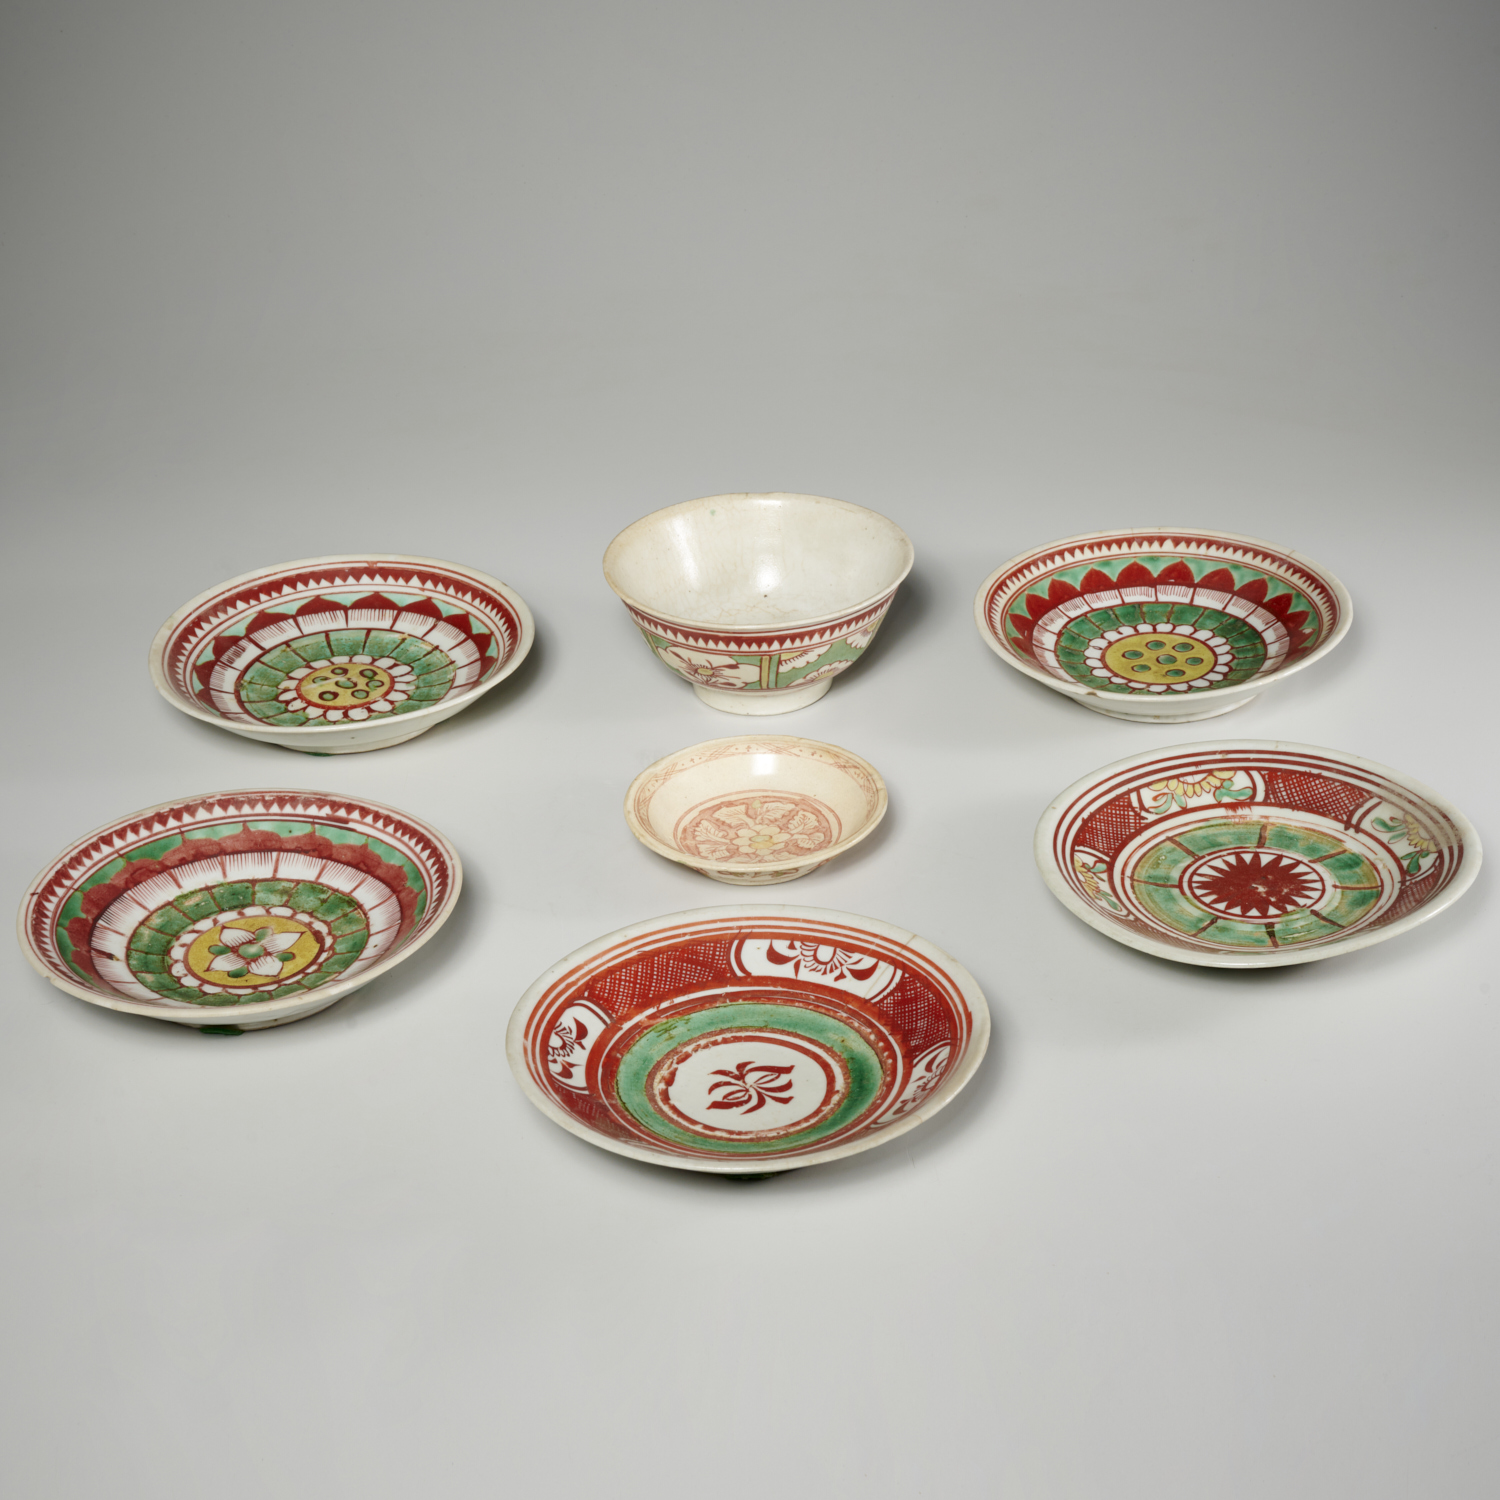 GROUP (7) SWATOW POLYCHROME DECORATED